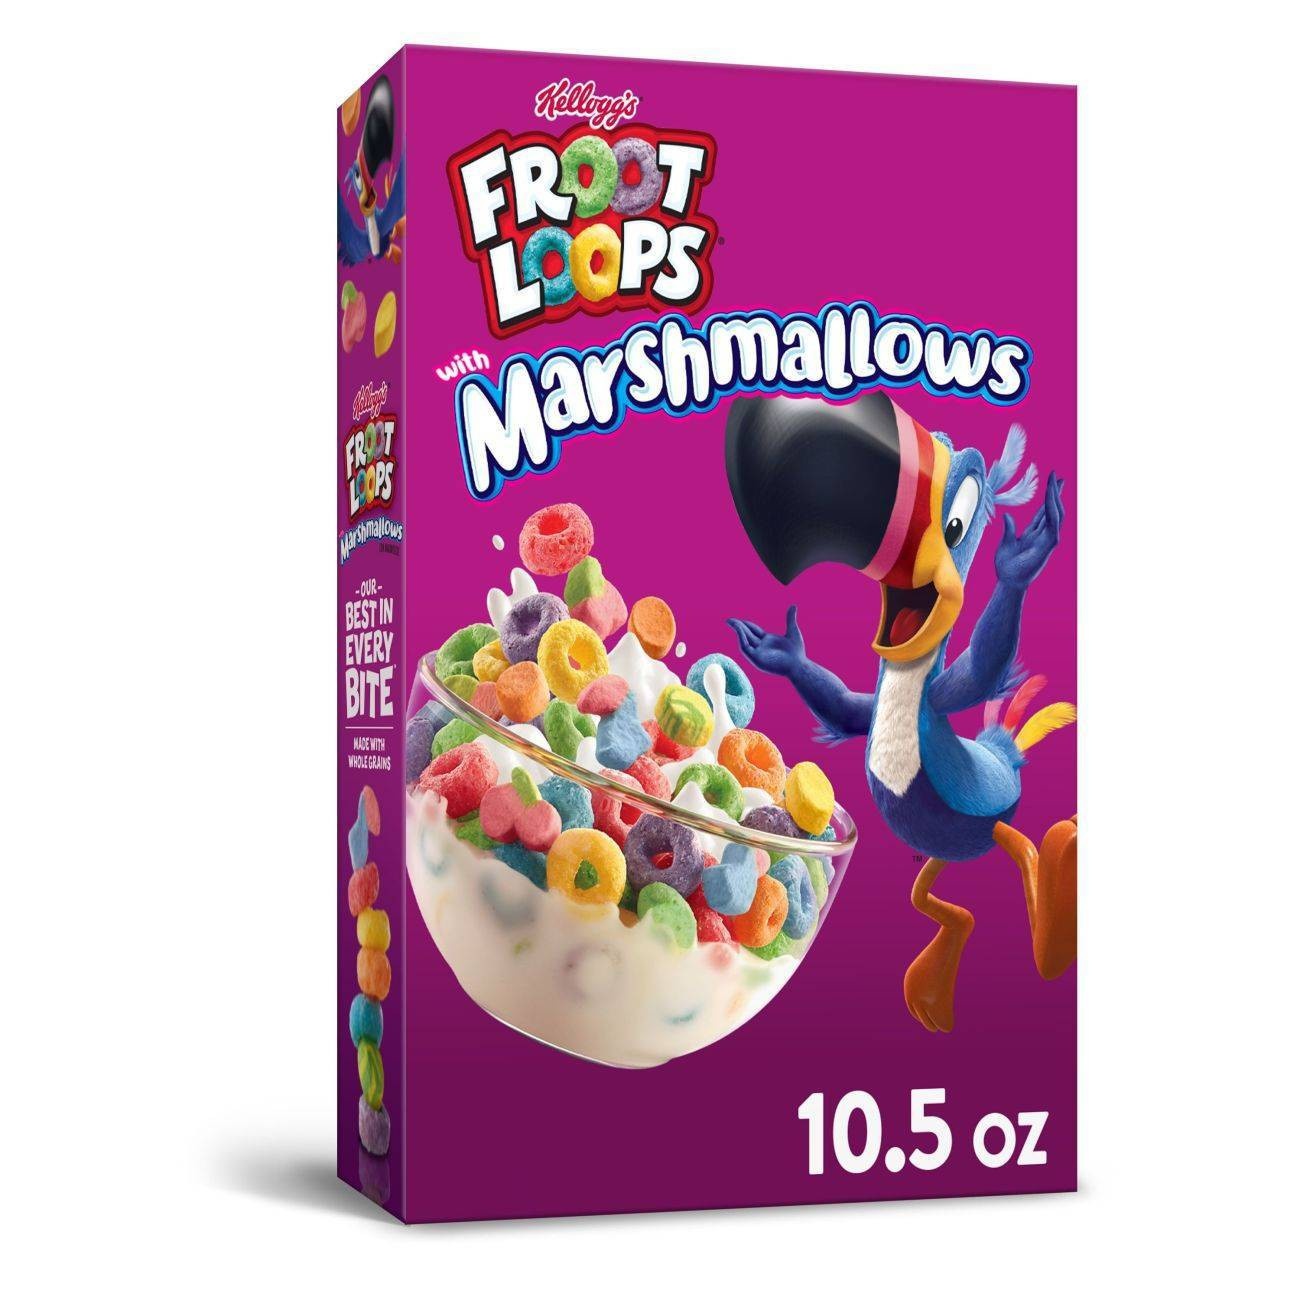 slide 1 of 7, Fruit Loops with Fruity Shaped Marshmallows Breakfast Cereal - Kellogg's, 12.6 oz